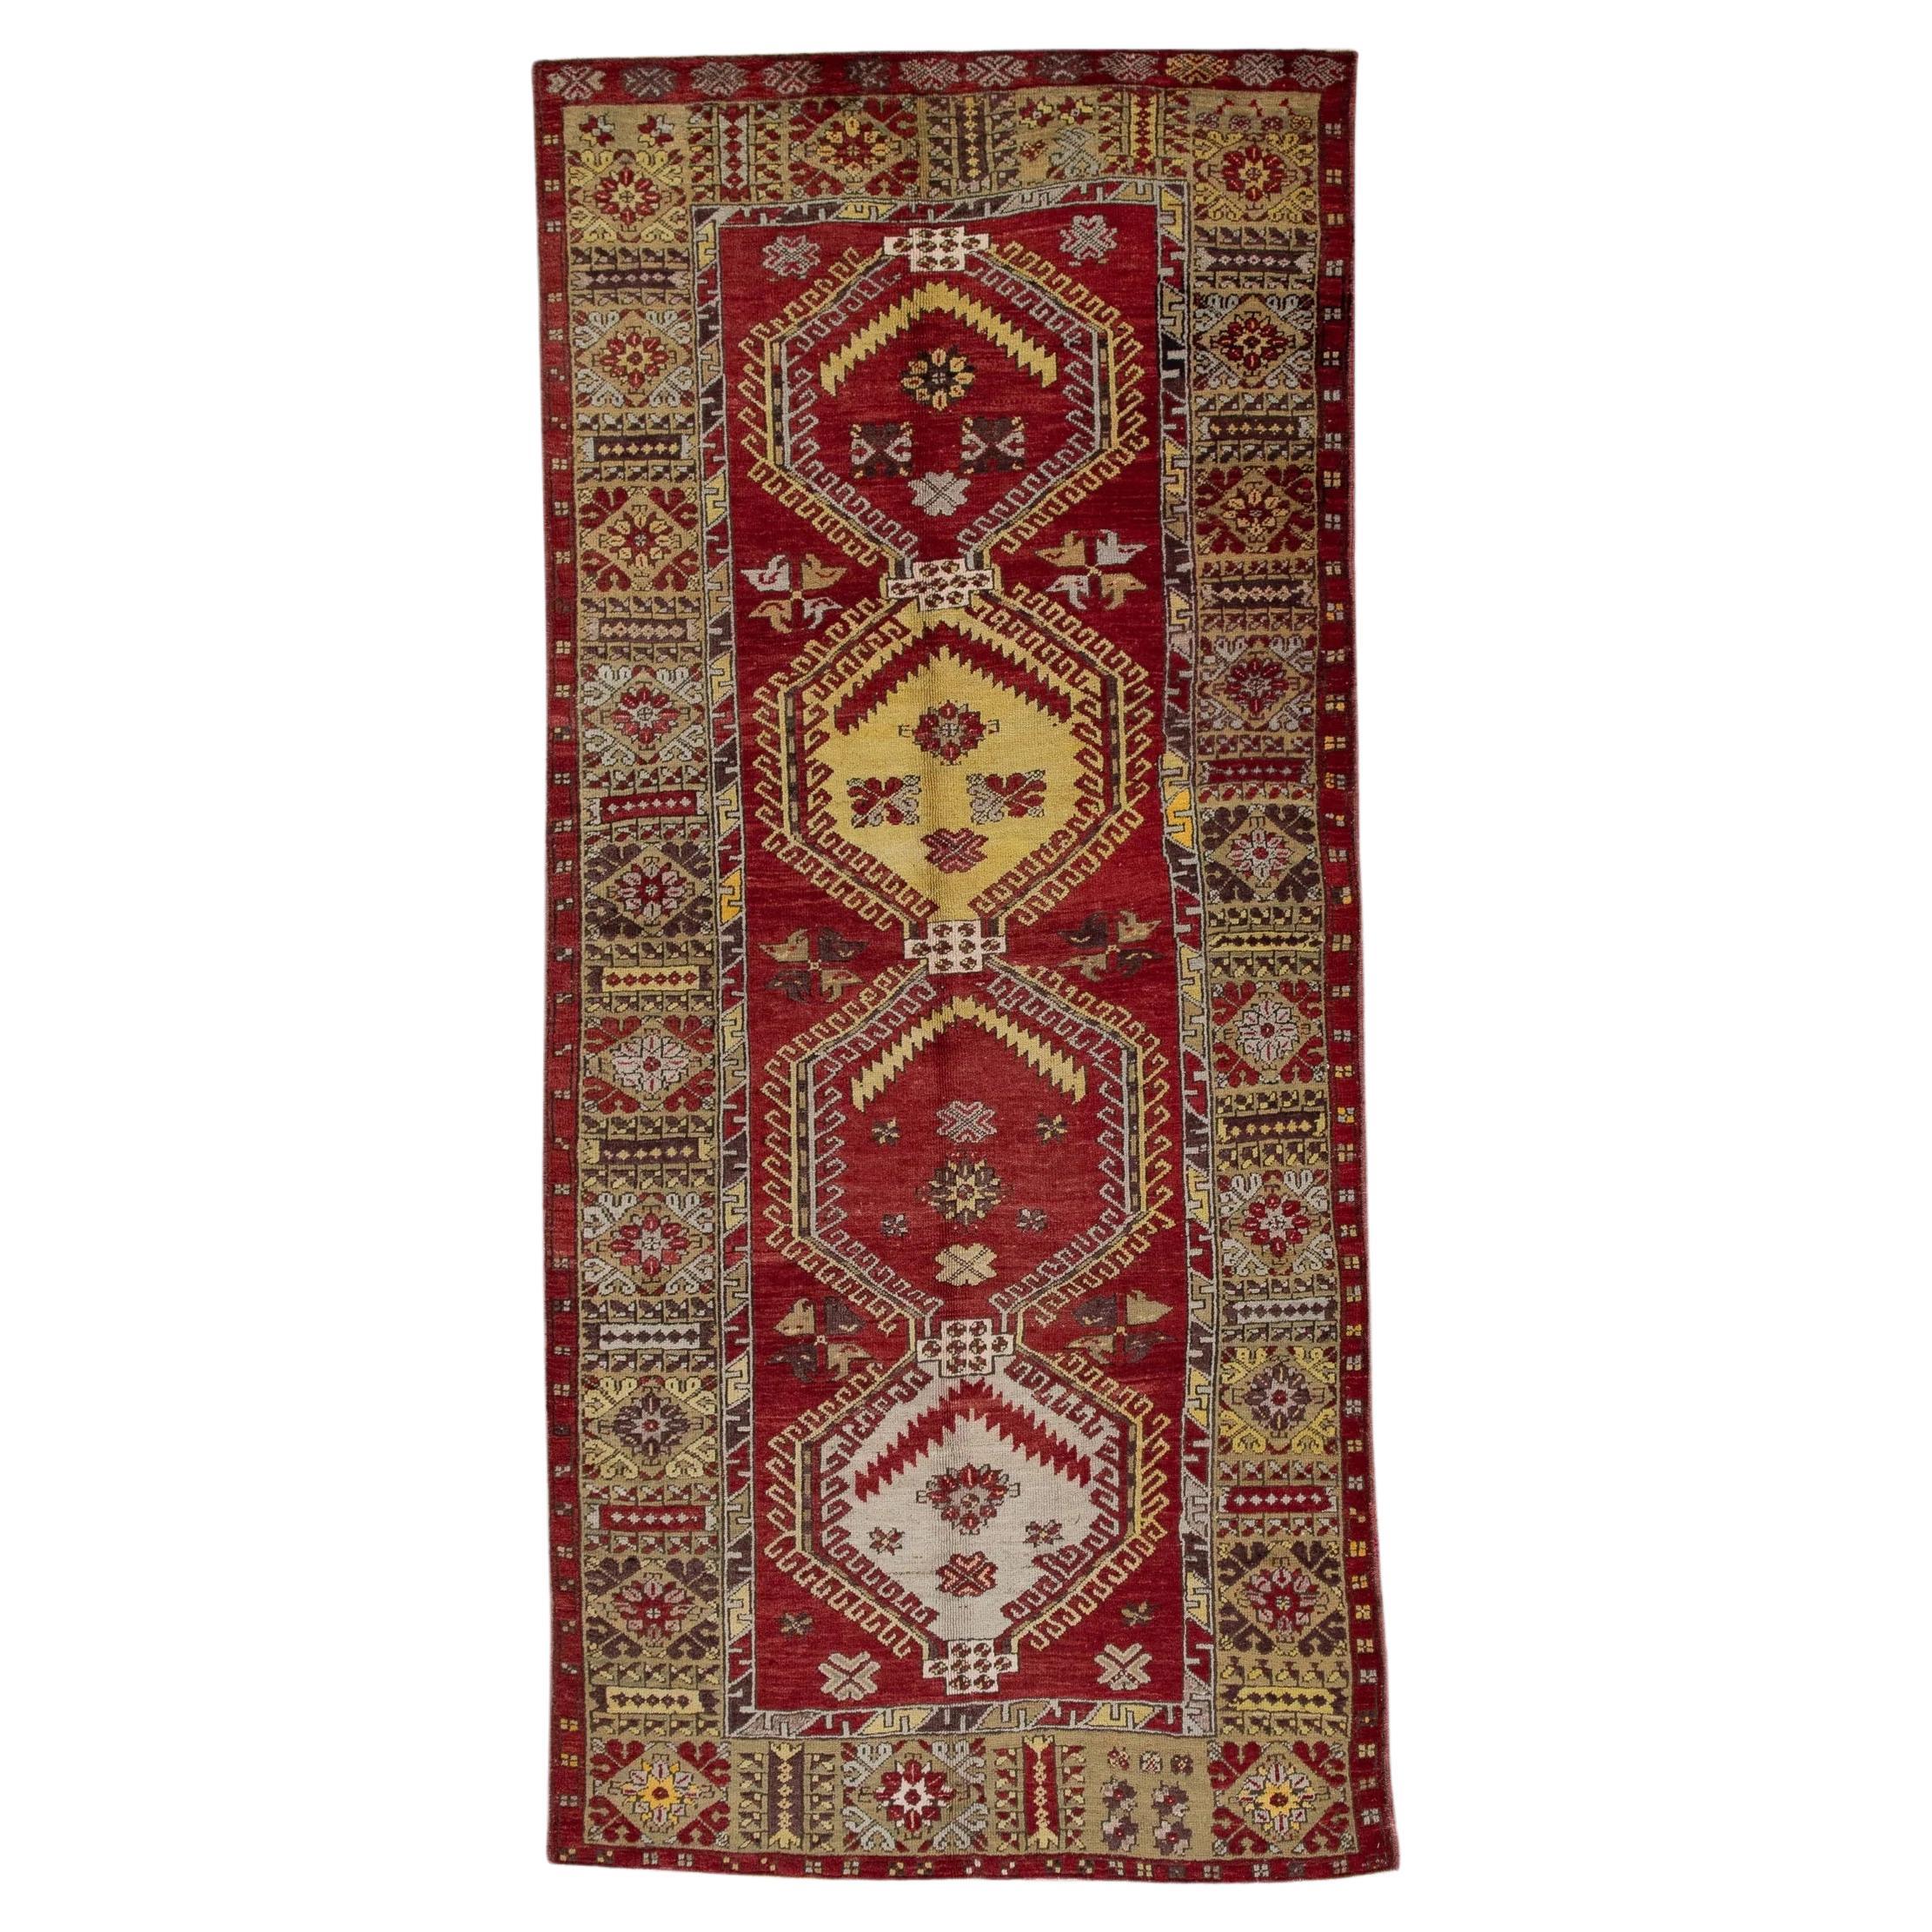 1960s Red & Yellow Vintage Turkish Runner 5'1" x 11'4" For Sale